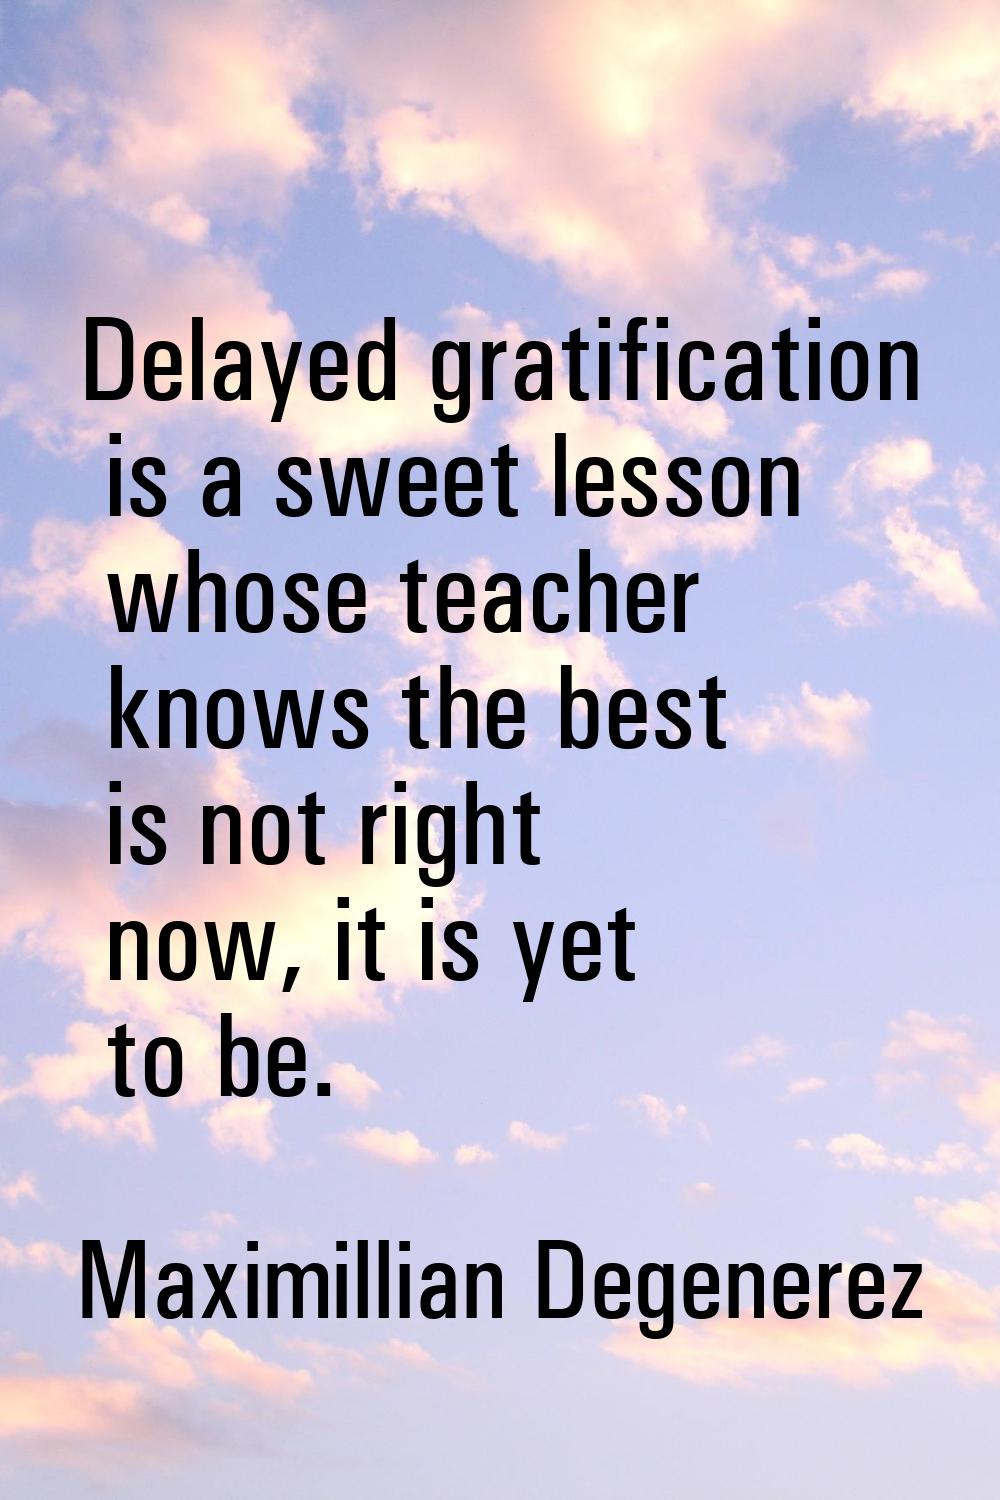 Delayed gratification is a sweet lesson whose teacher knows the best is not right now, it is yet to